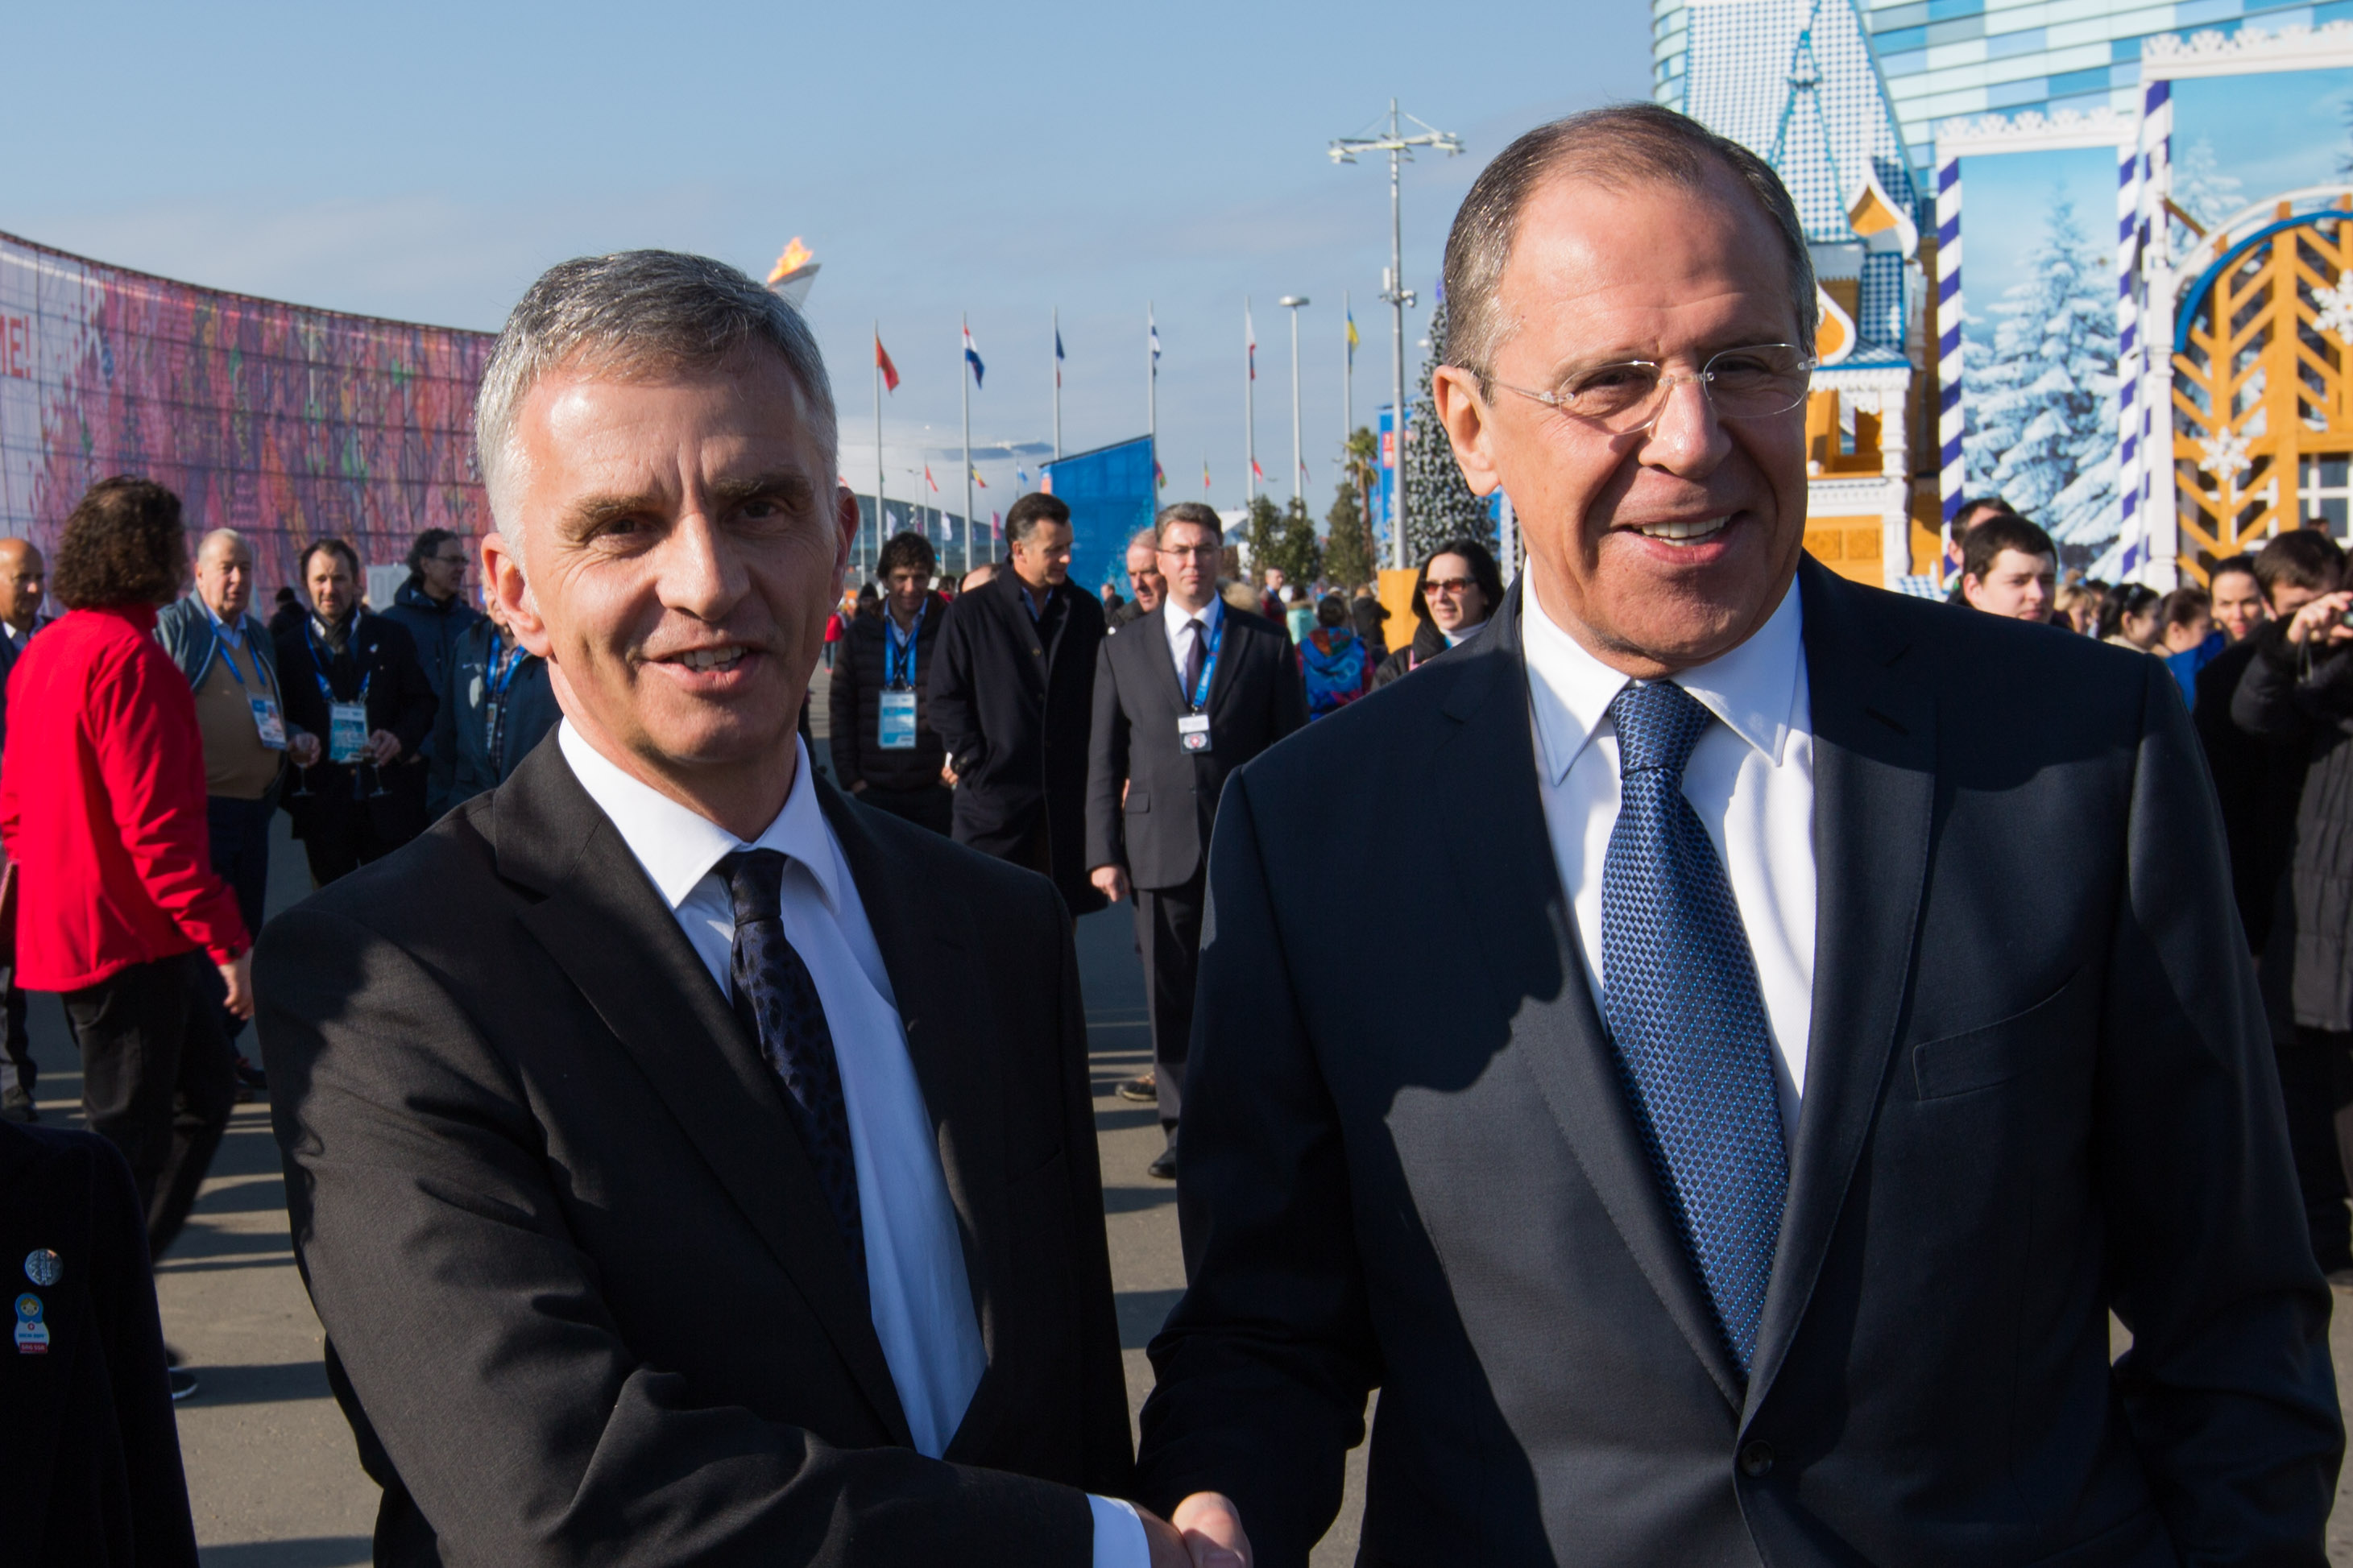 Didier Burkhalter with the Russian Foreign Minister Sergey Lavrov